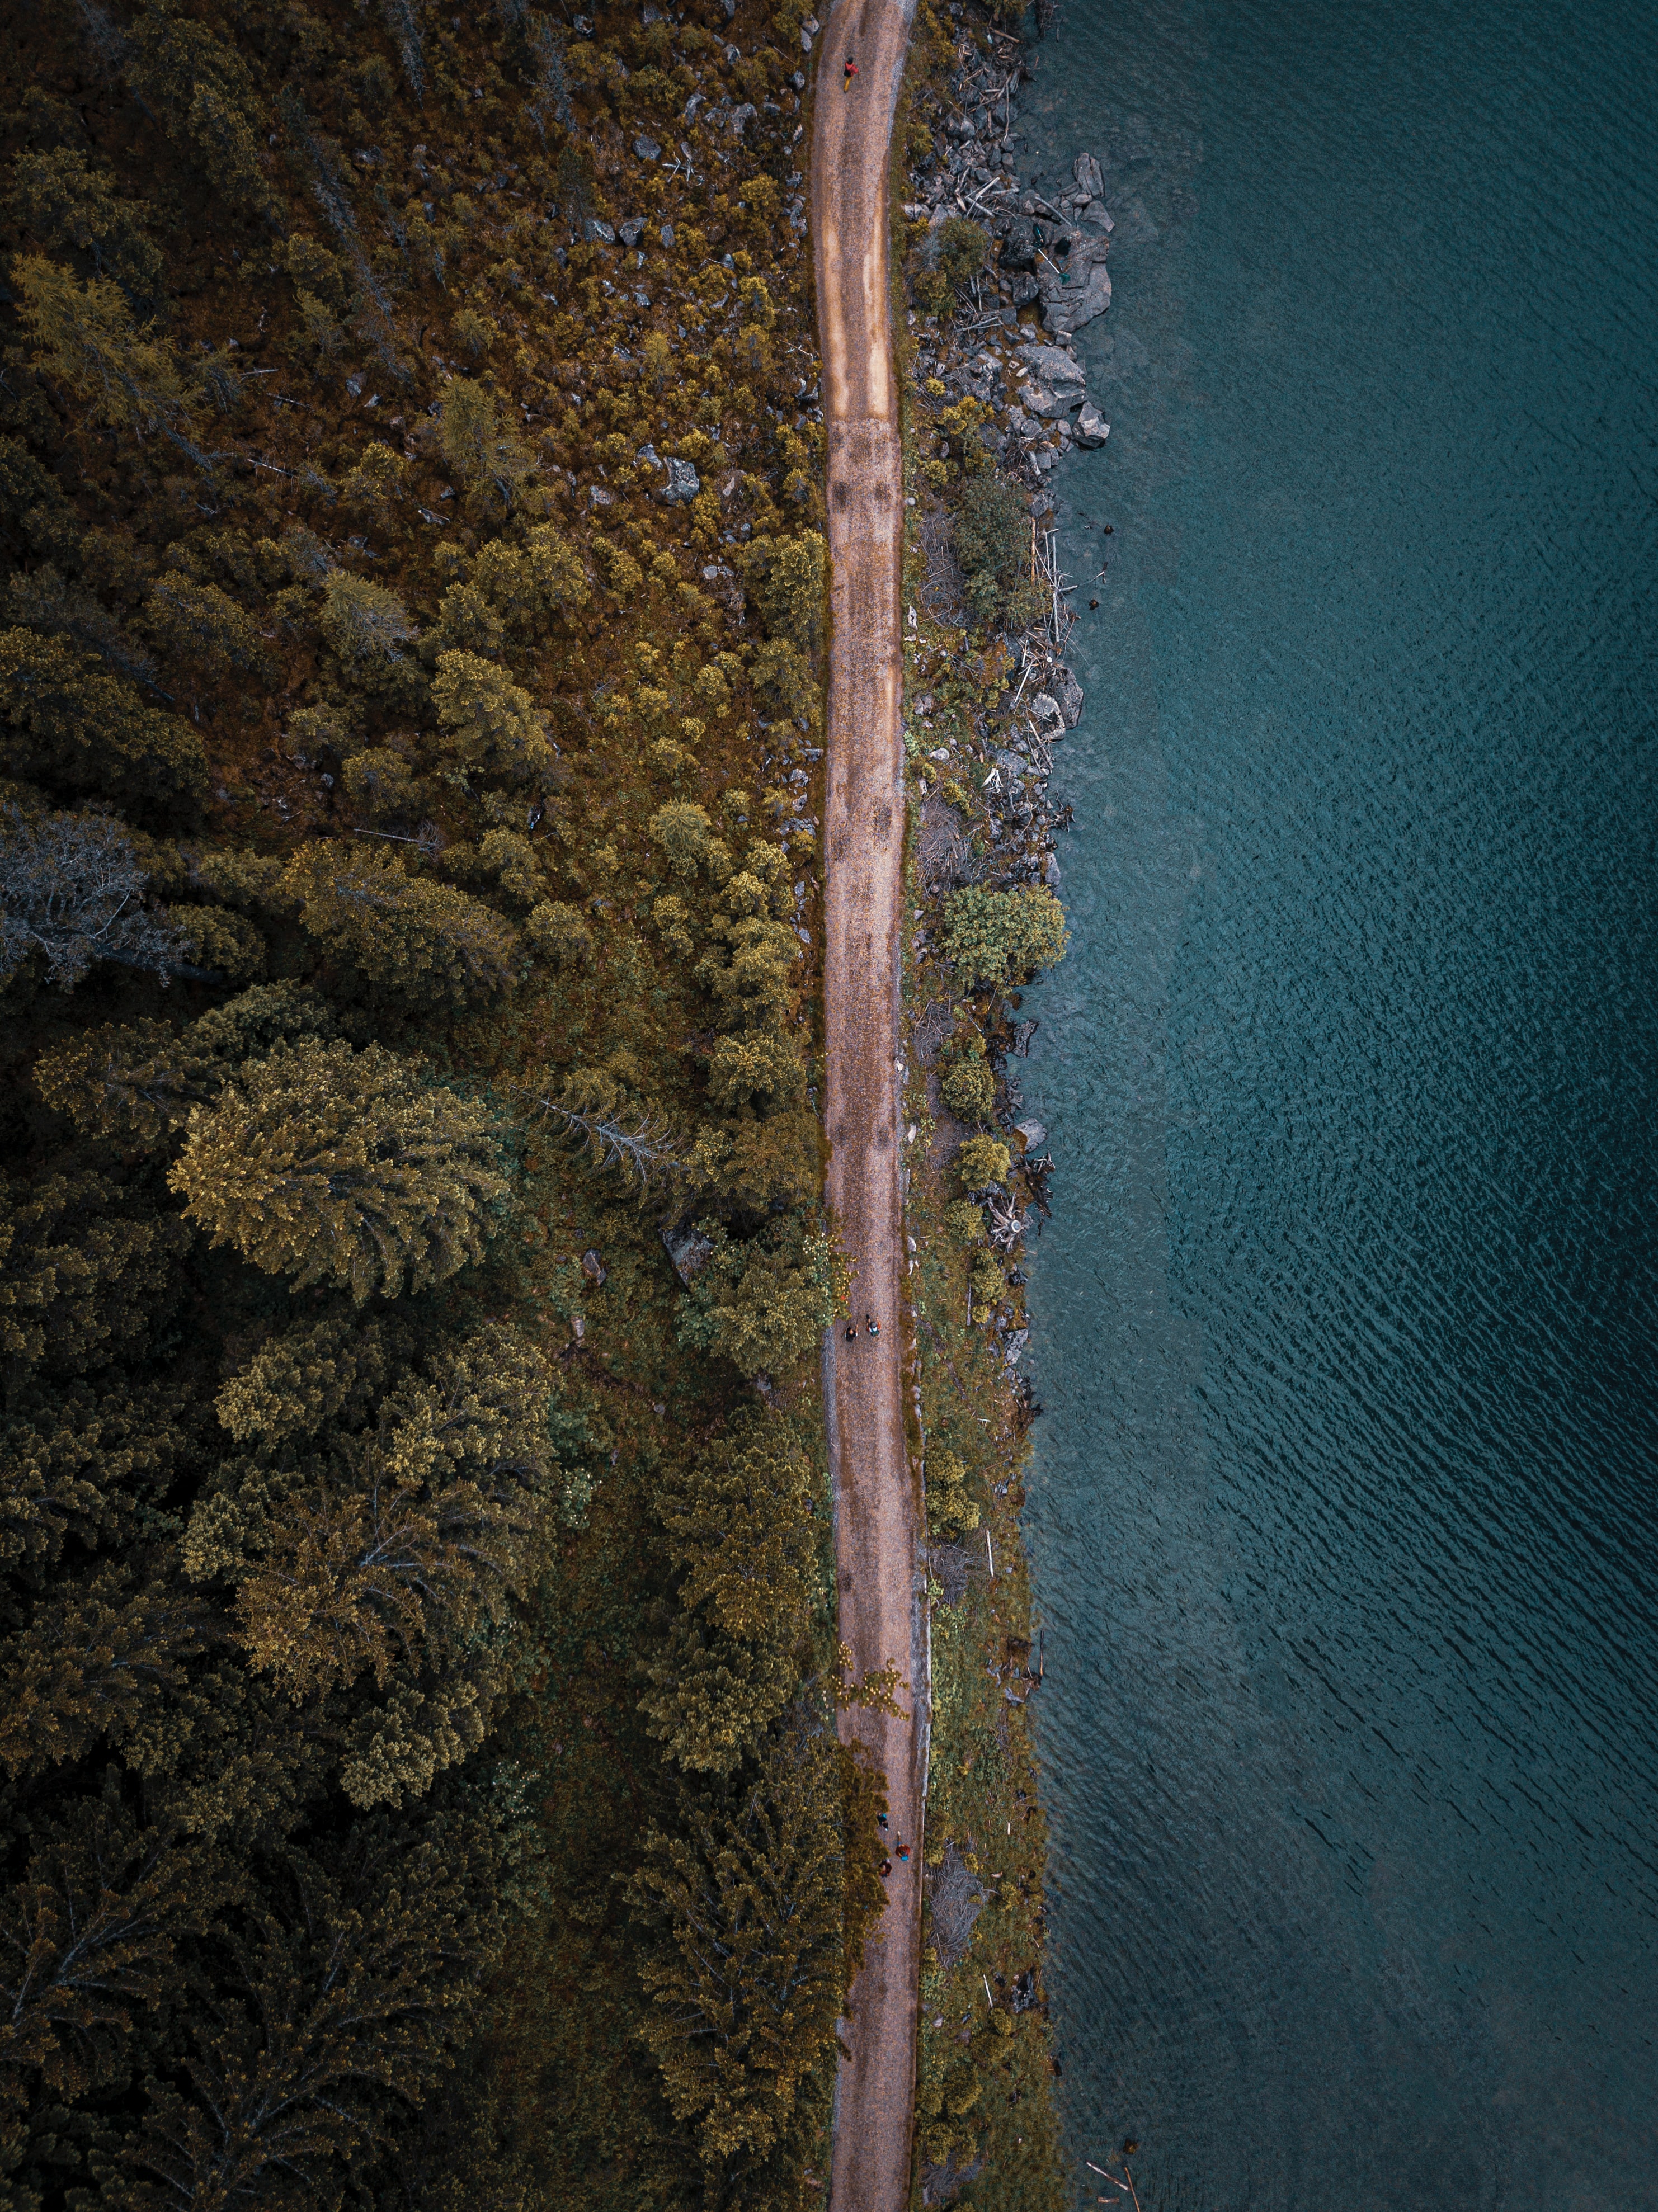 view from above, nature, trees, sea, road, forest wallpaper for mobile